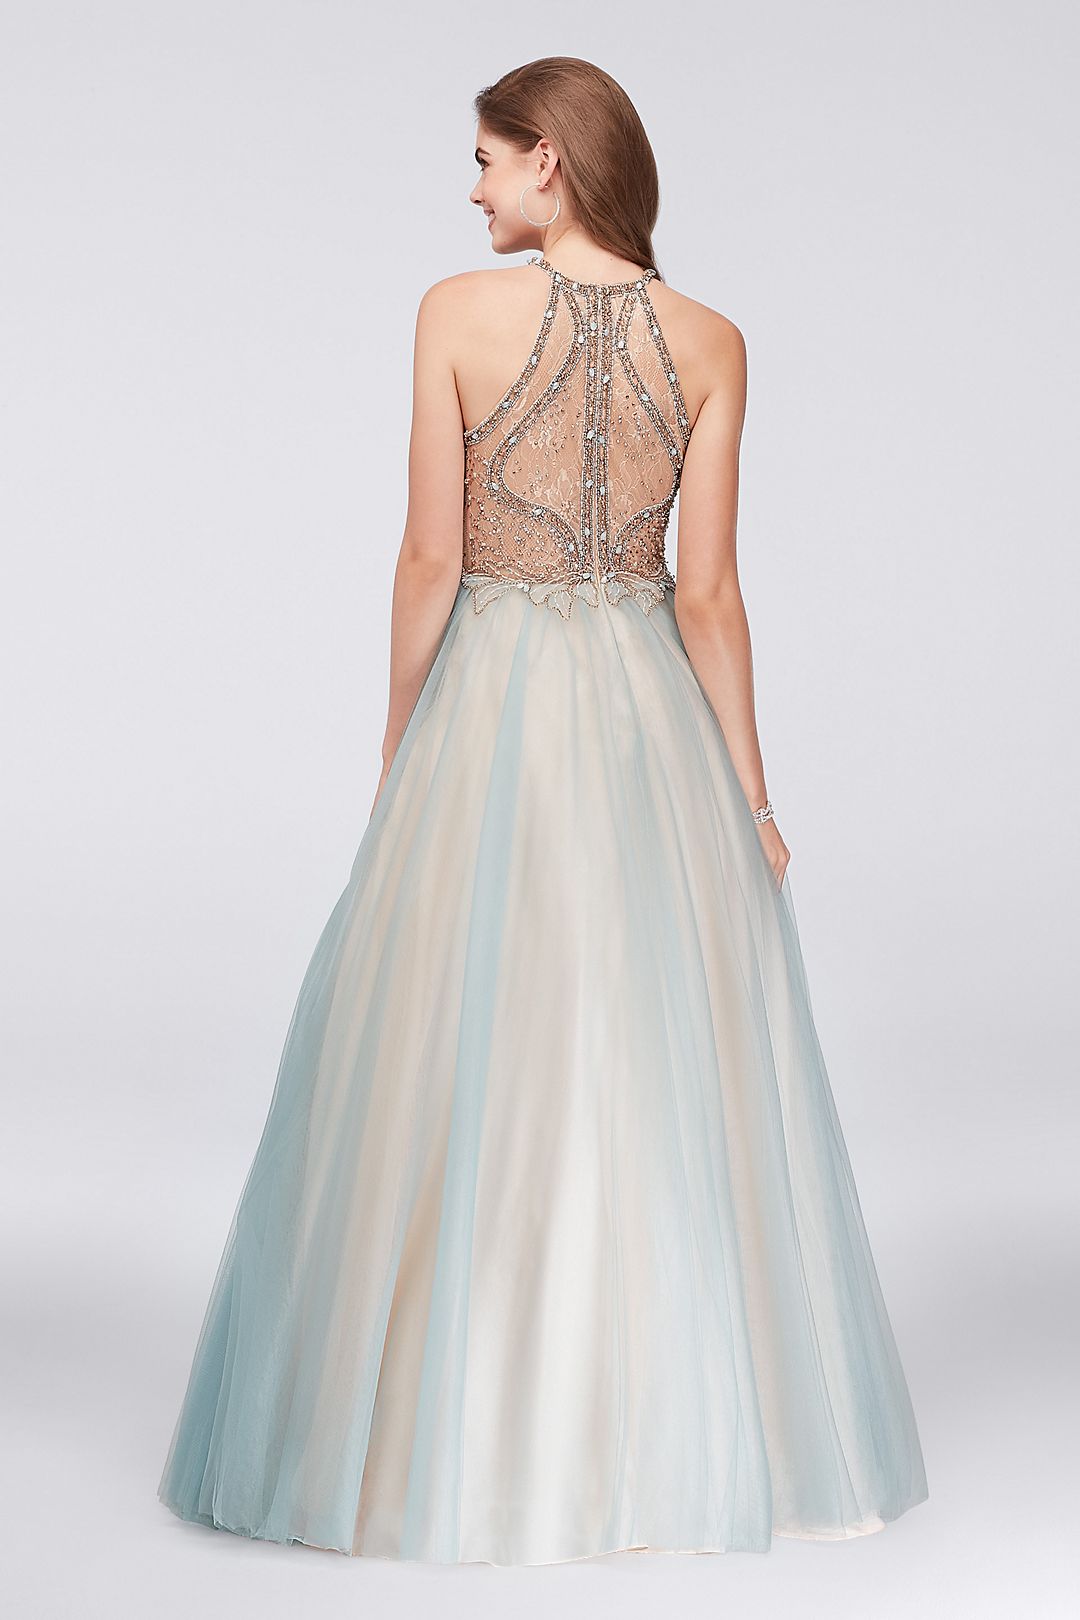 Layered Tulle Ball Gown with Beaded Bodice Image 2